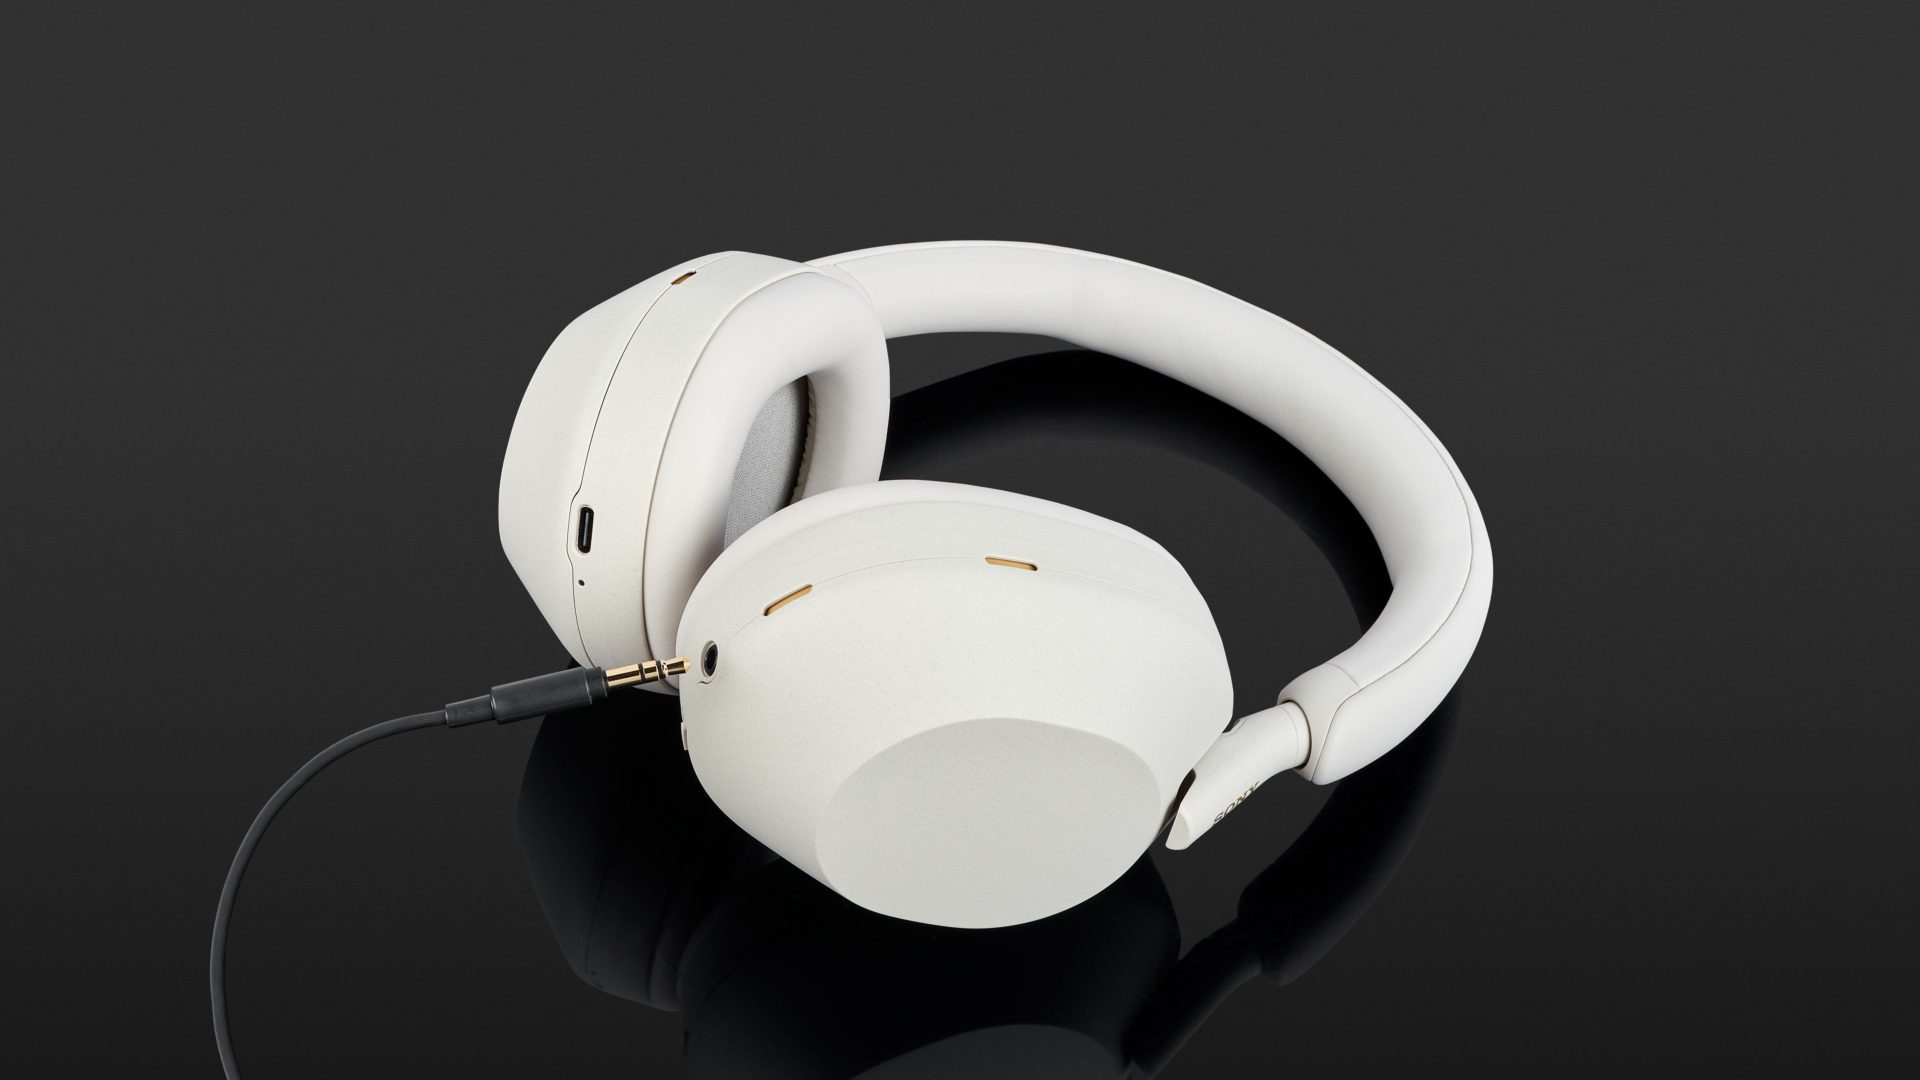 Sony WH-1000XM5 Wireless Closed-Back Over-Ear Noise Cancelling  Headphones,Silver WH1000XM5/S